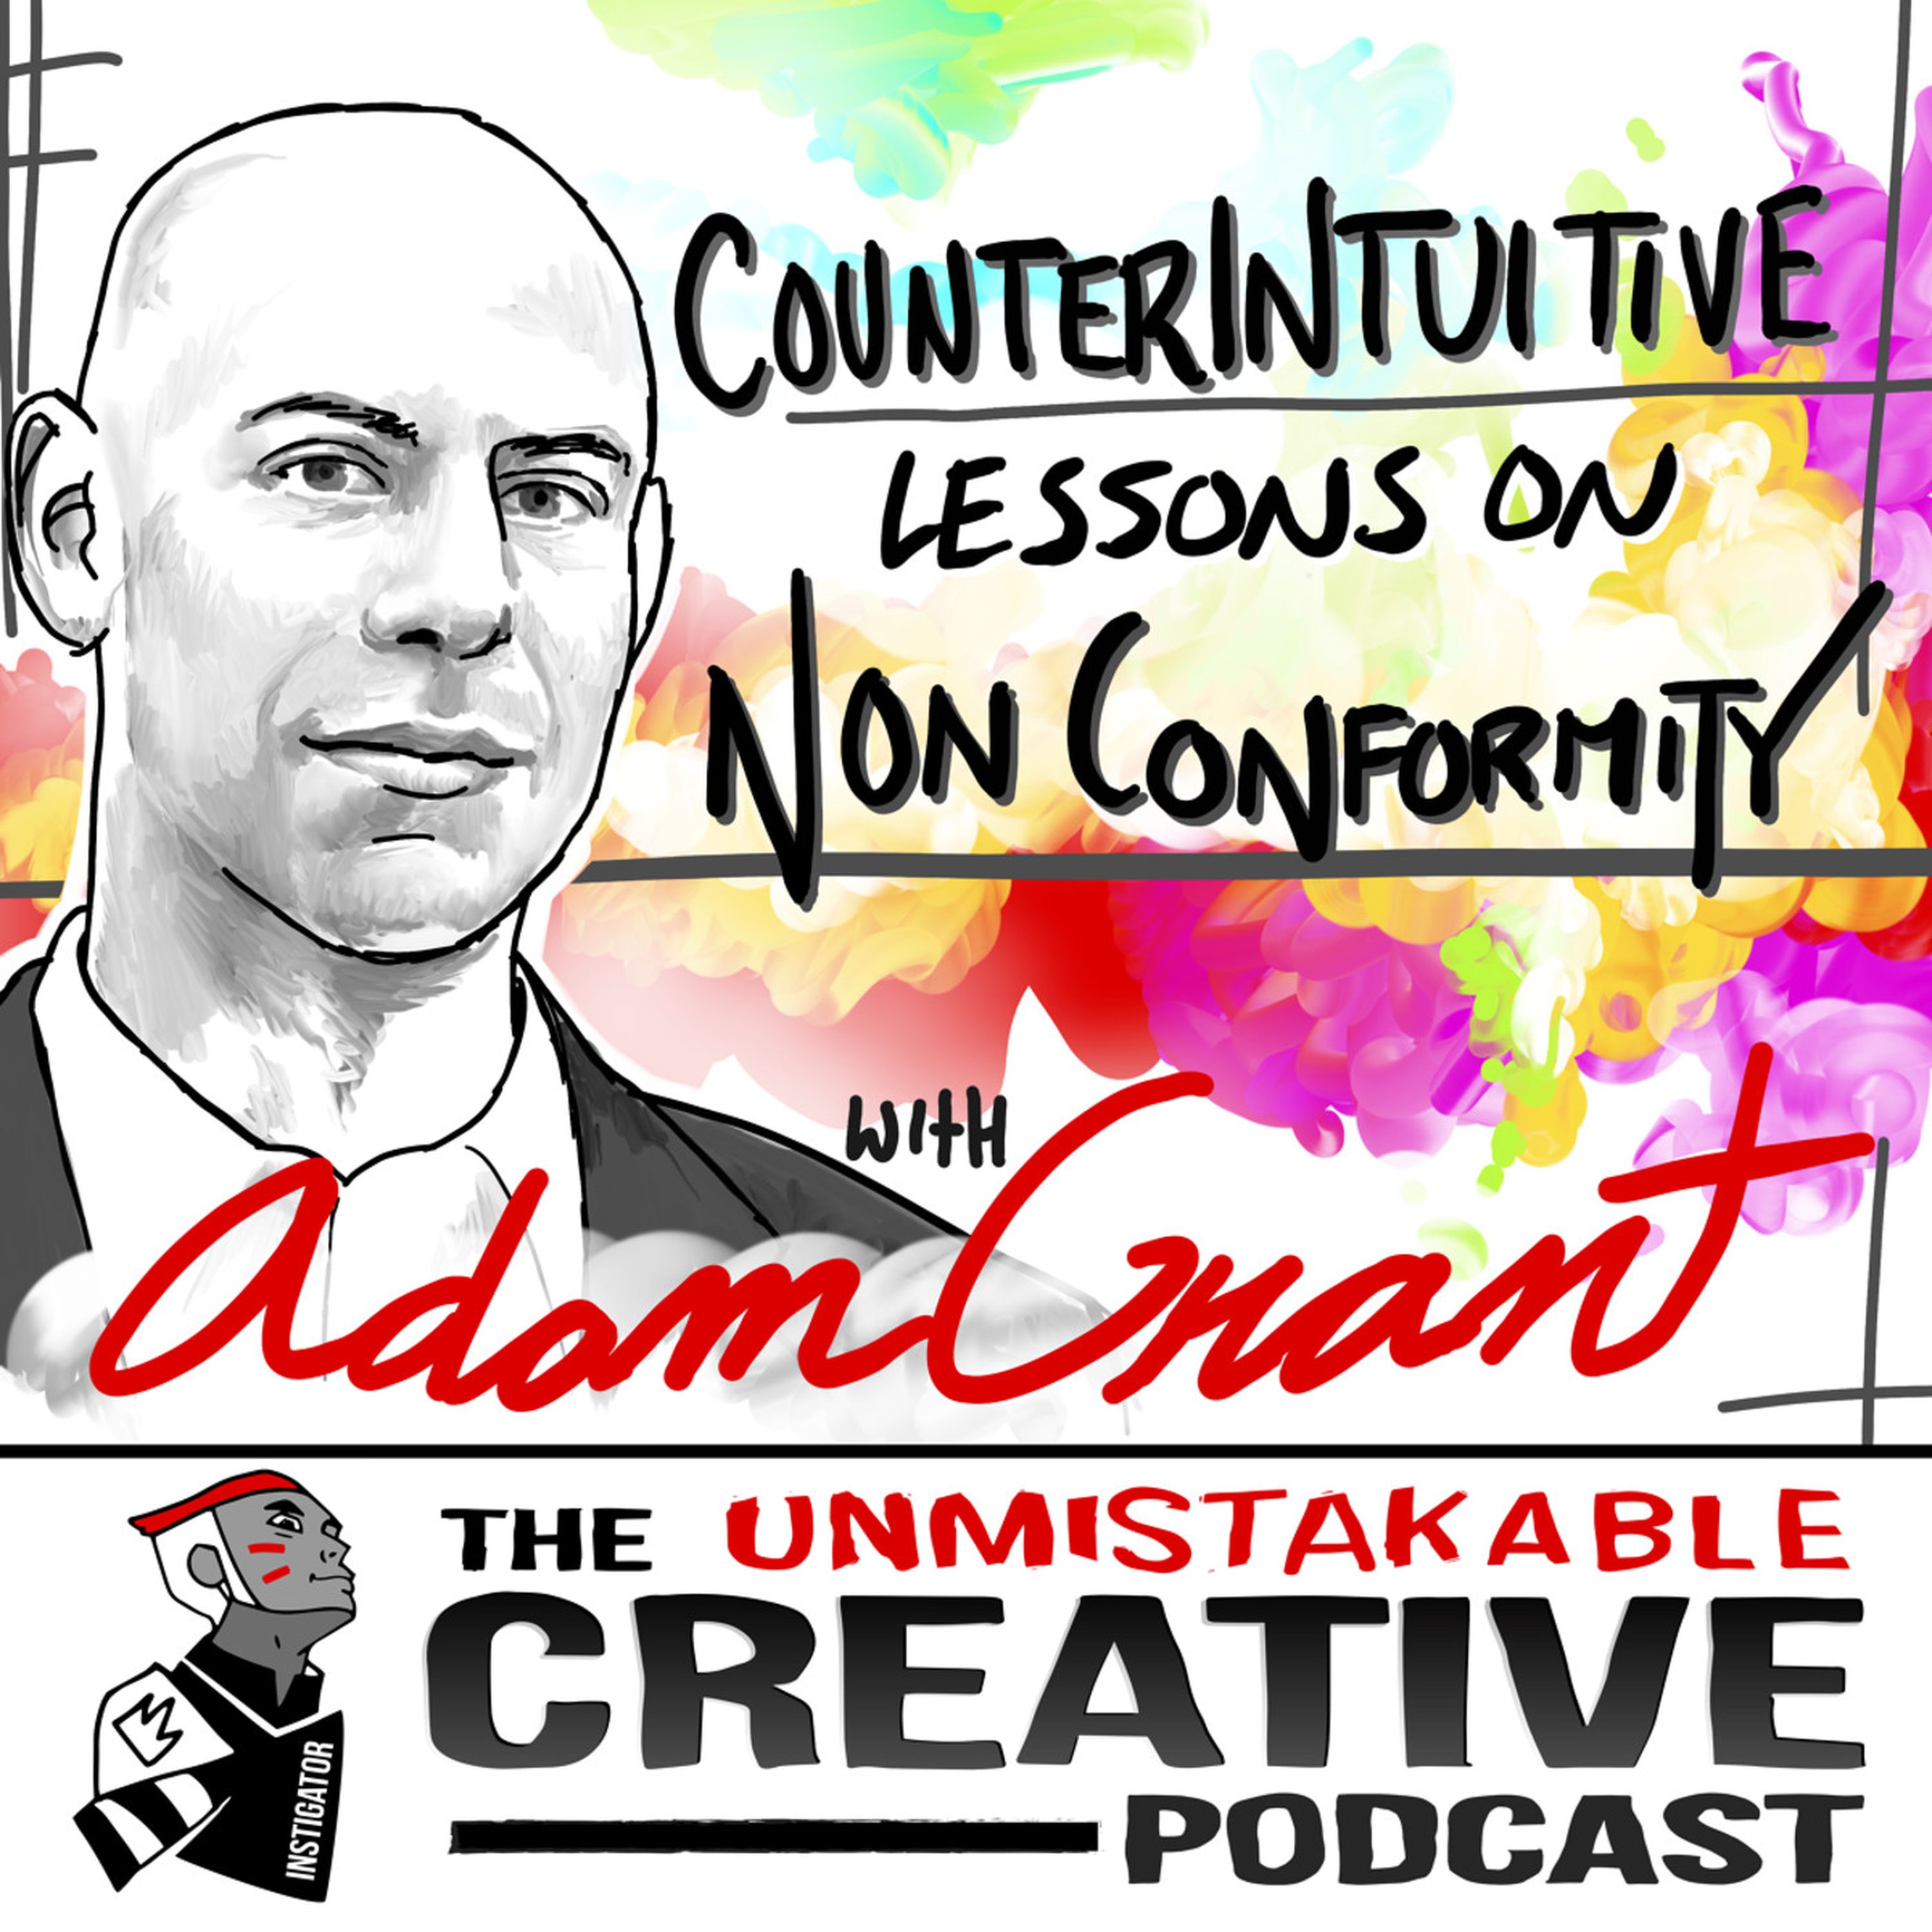 Counterintuitive Lessons on Non-Conformity with Adam Grant